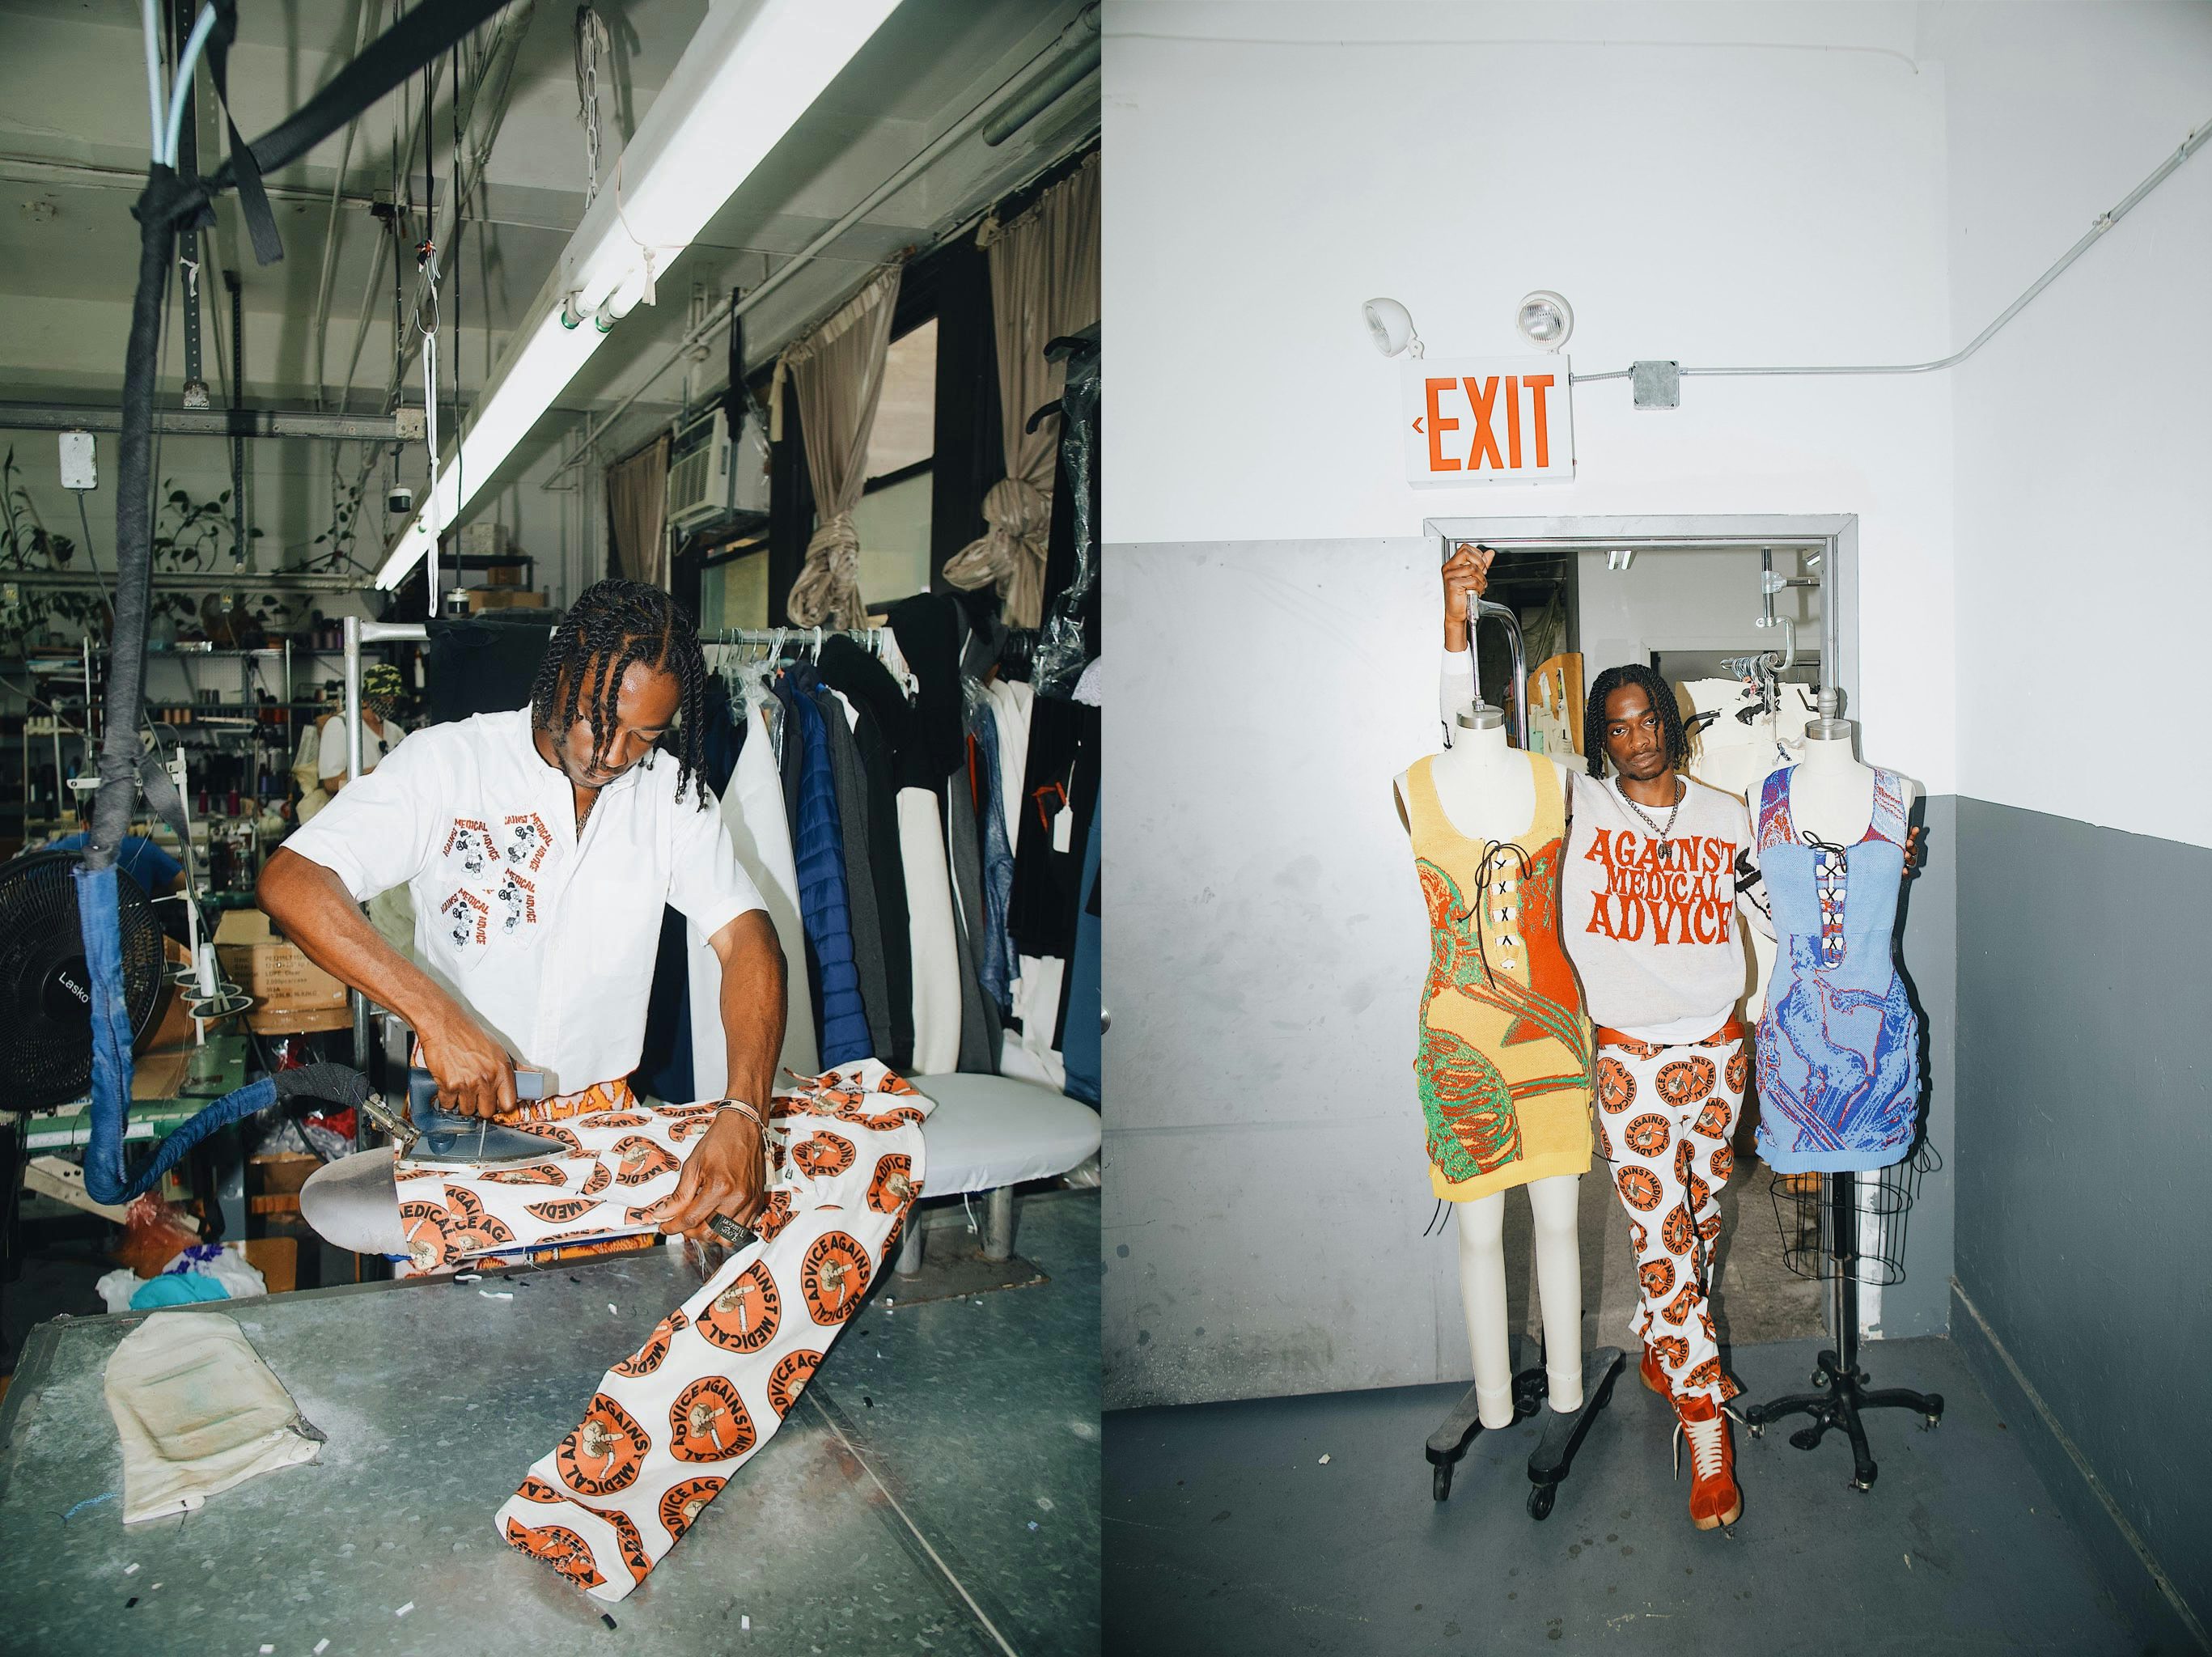 The Emergency Room Nurse Turning His Fashion Dreams Into a Reality | The Spotlight, People